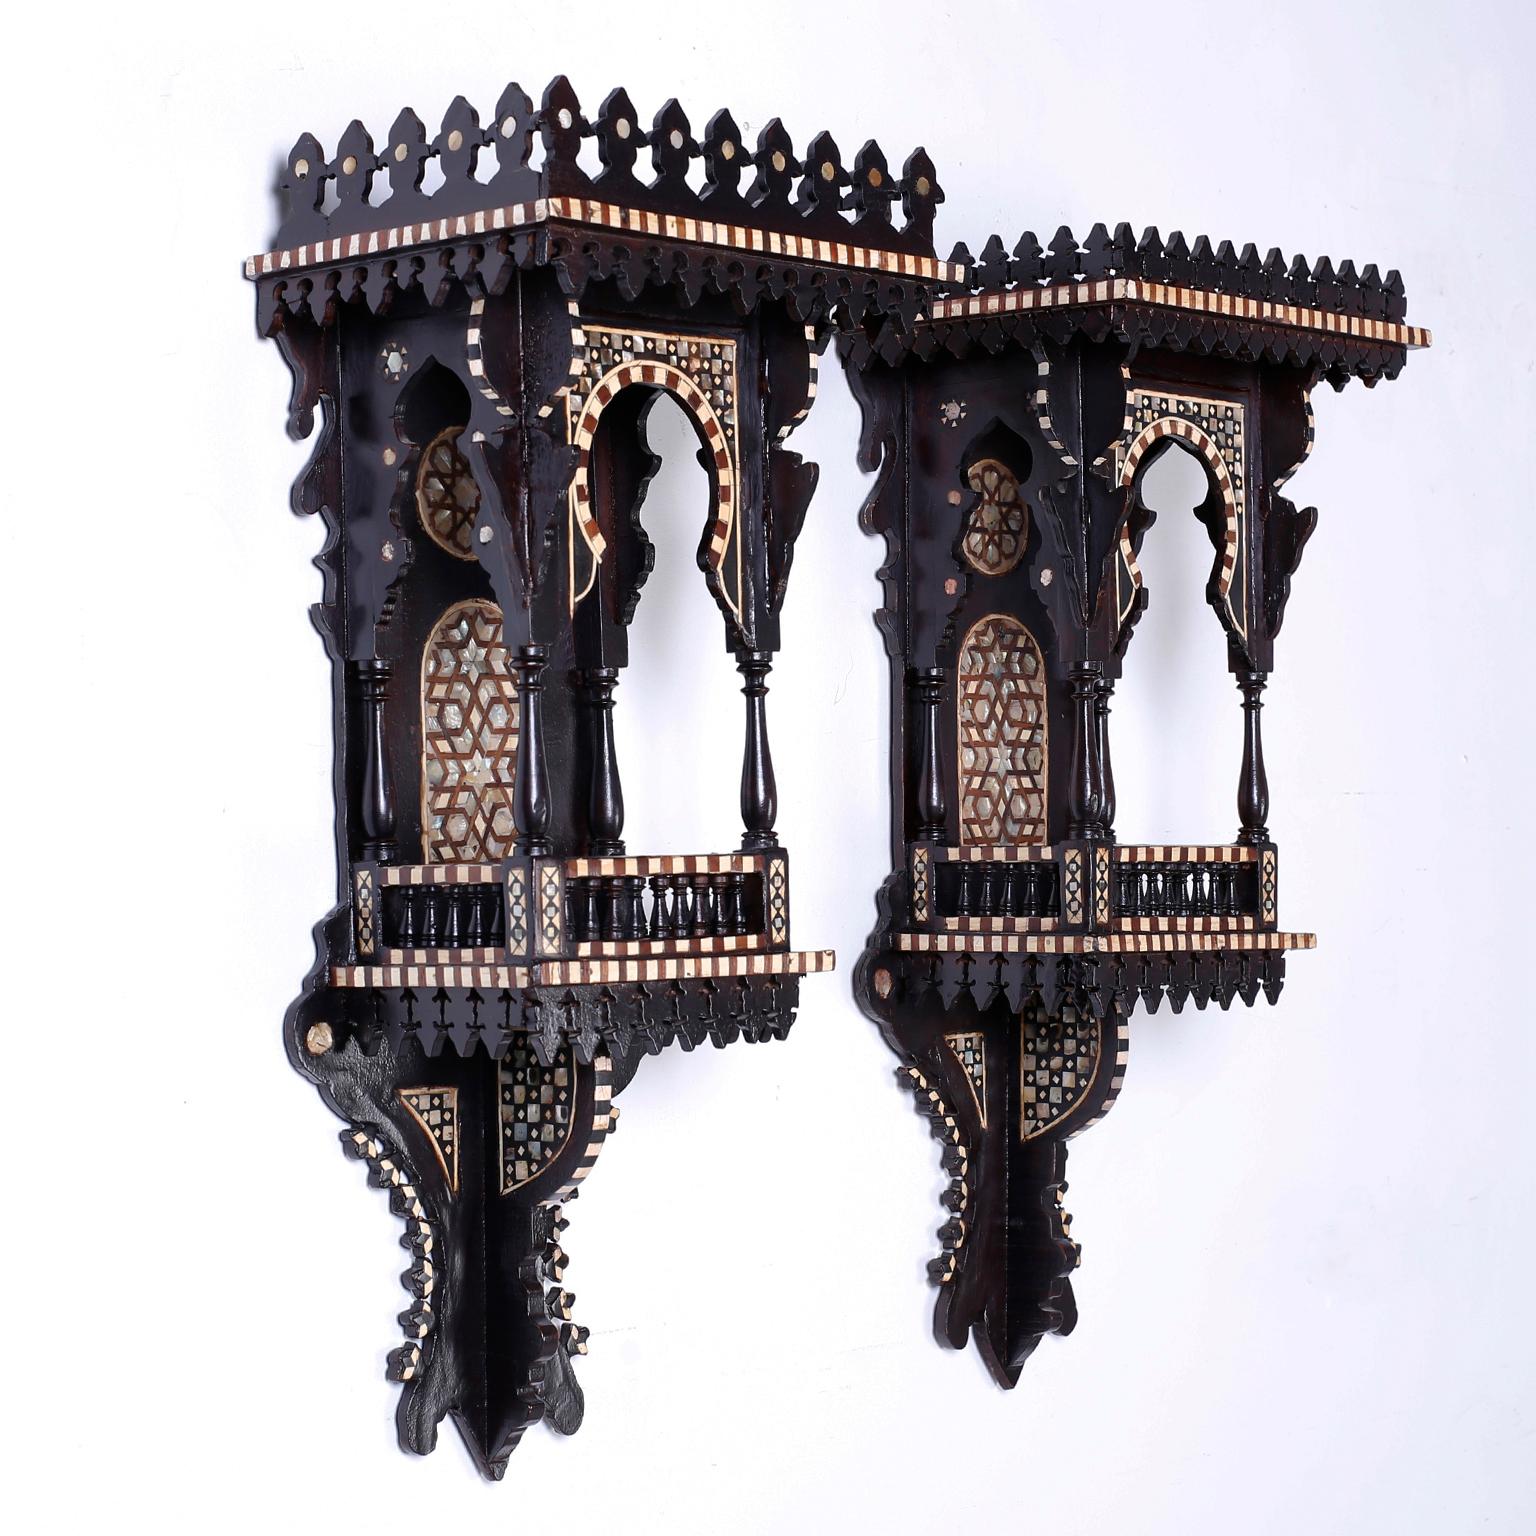 Pair of antique carved wood and ebonized wall brackets with an intriguing architectural form. Featuring a gallery around the top and a balcony complete with balustrades, columns and Moorish arches. Highlighted with inlaid geometric mother of pearl